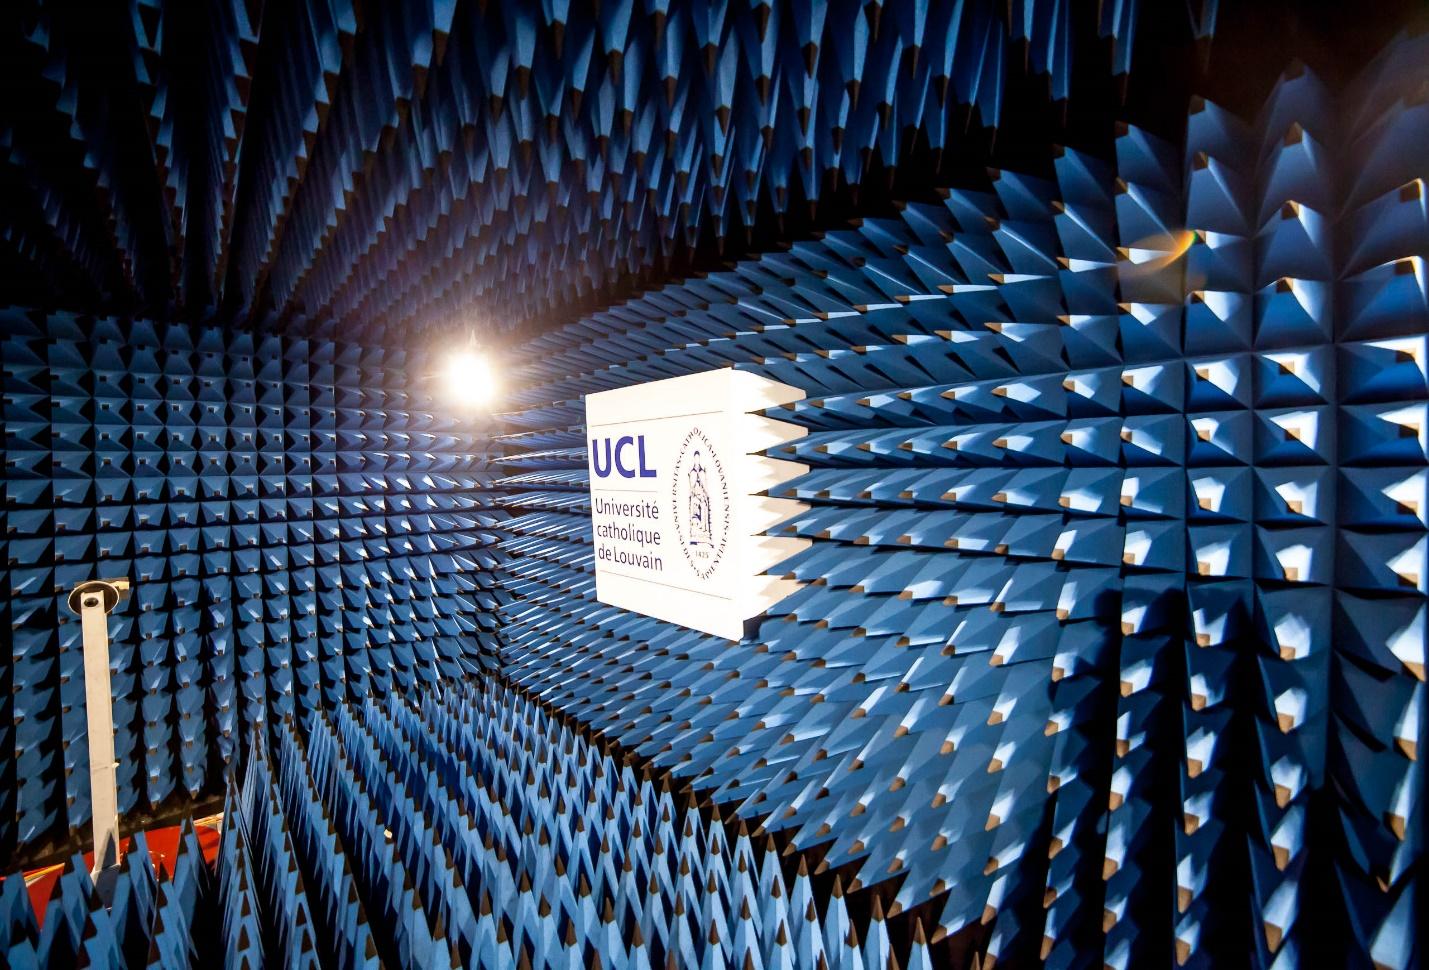 Audiology Rooms and Anechoic Chambers